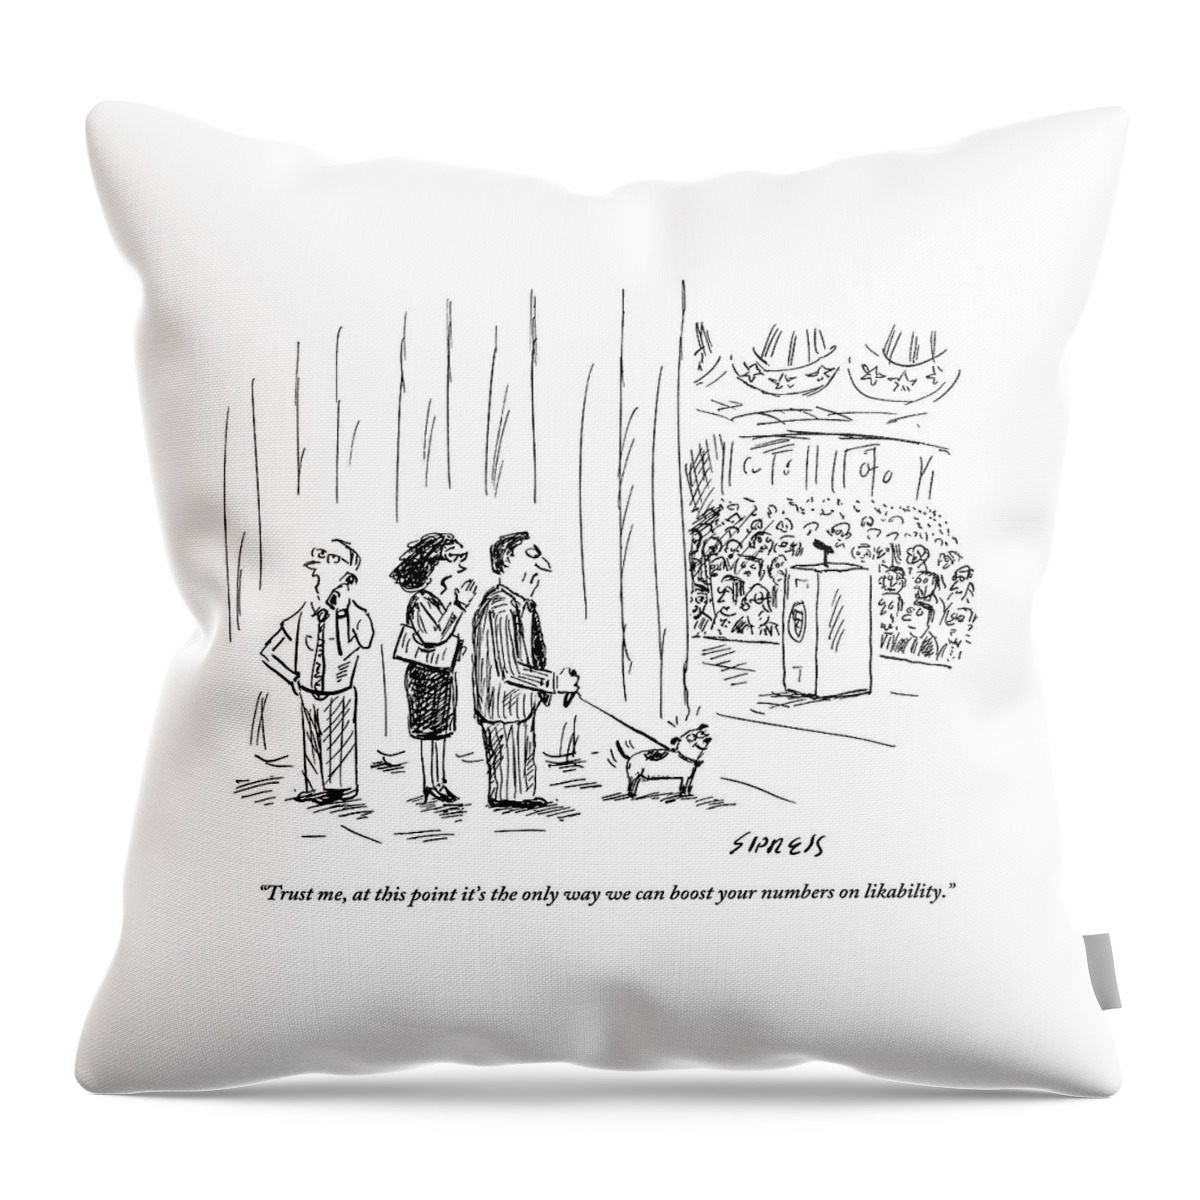 A Political Consultant Gives Her Client A Puppy Throw Pillow